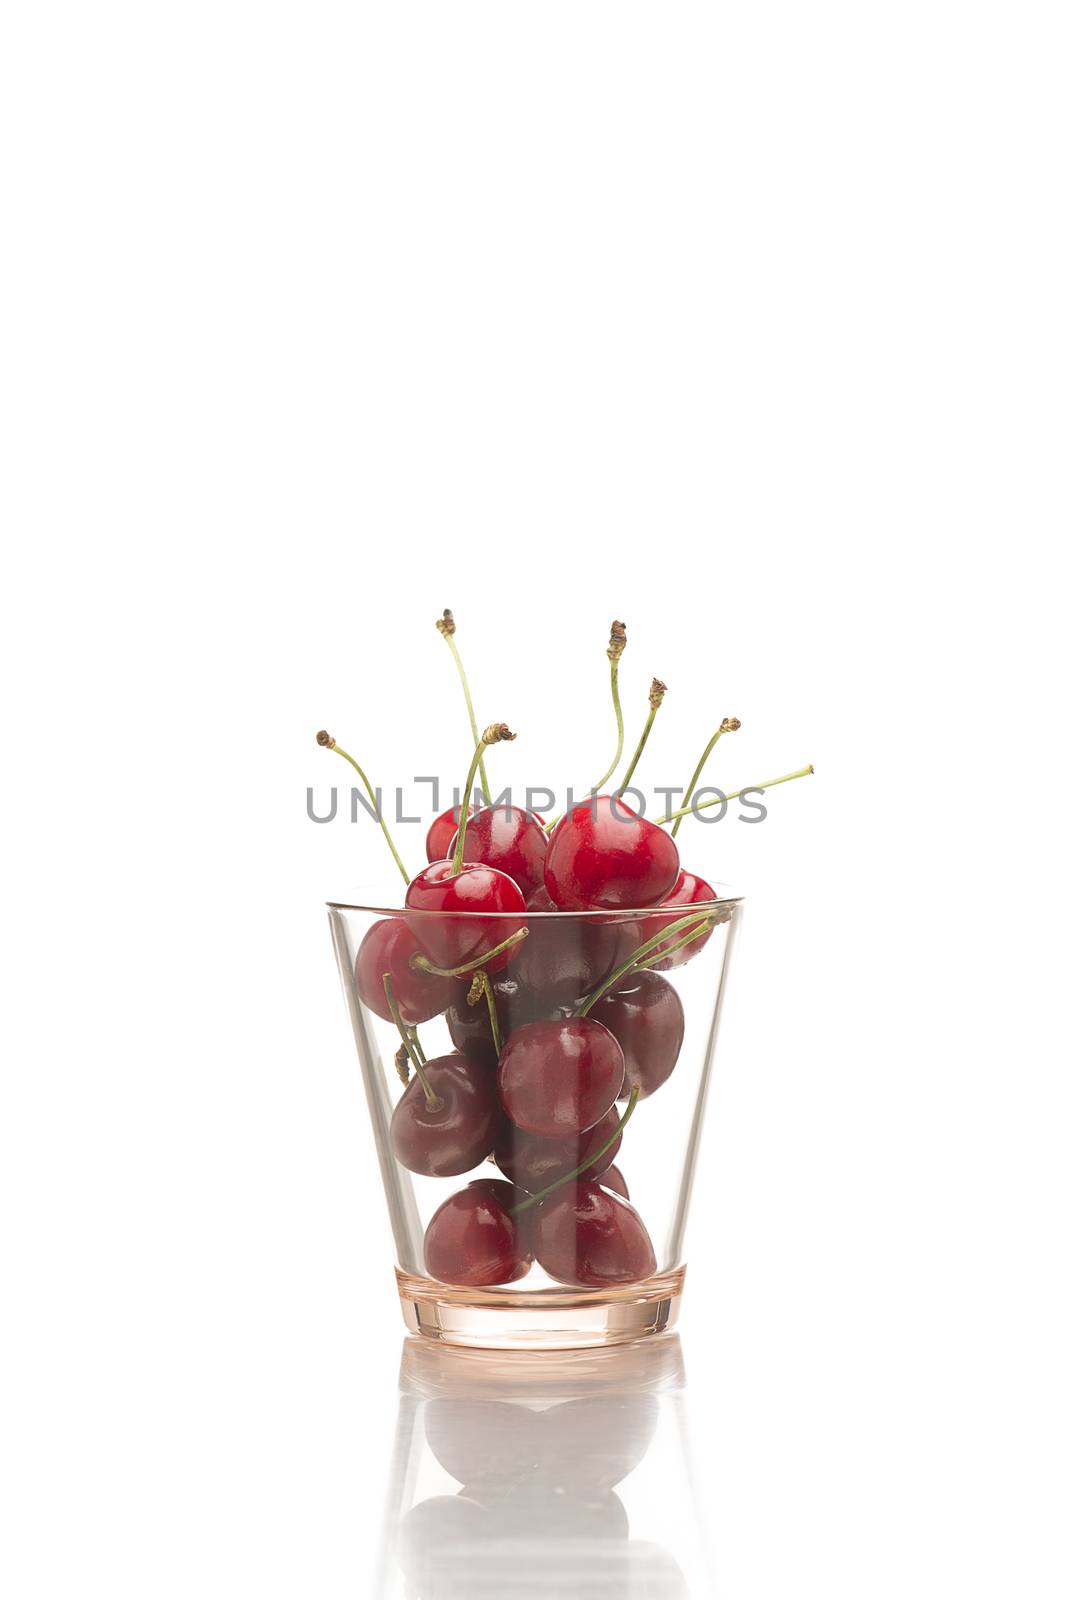 Transparent glass full of luscious ripe red organic cherries rich in Vitamin C, dietary fiber and minerals on a white background with copyspace, vertical format